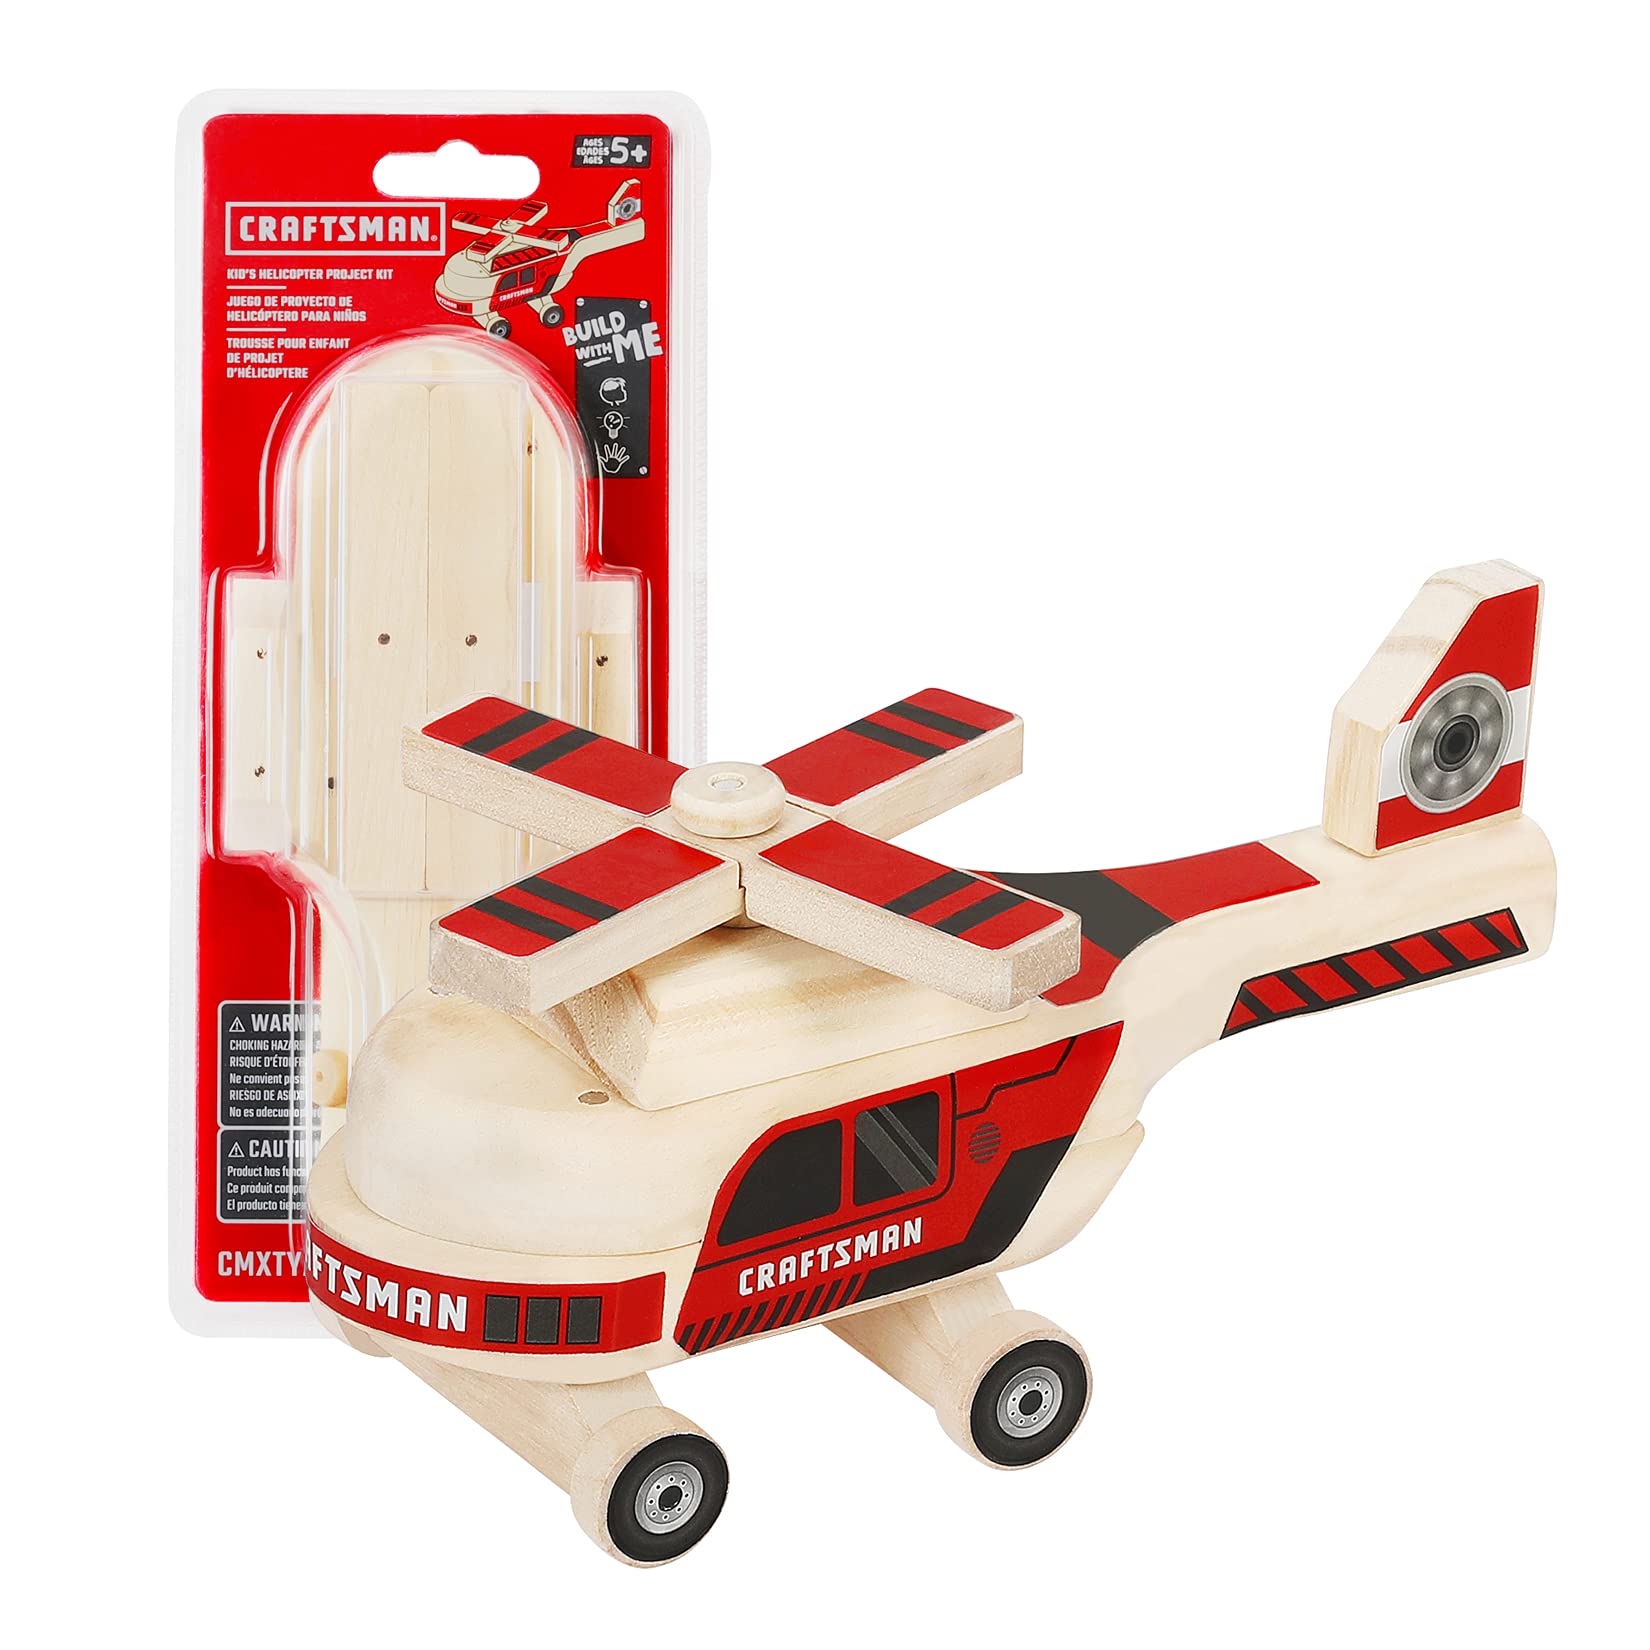 Craftsman Woodworking Helicopter Project Kit for Kids, Educational Toy Realistic Carpentry Helicopter Construction, Take-along Gift for Boys & Girls, Age 5+